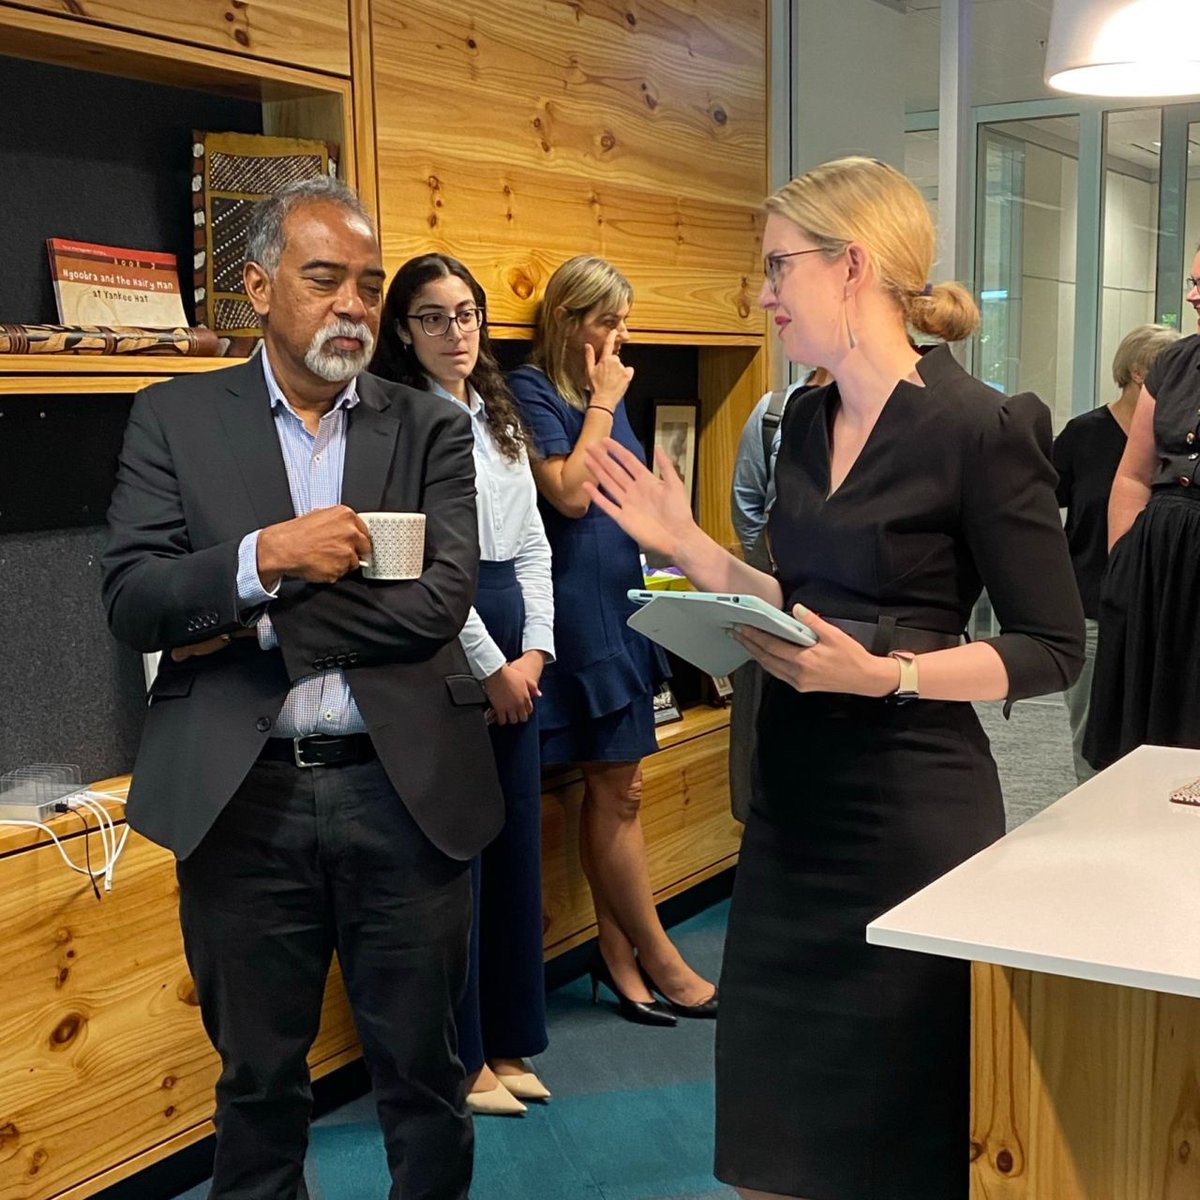 Today we said farewell to a valued leader, a vital contributor to our work and a kind and generous colleague, Romlie Mokak, as his 5-year term with us concludes. His presence will be missed but his influence on the Commission will last well into the future.